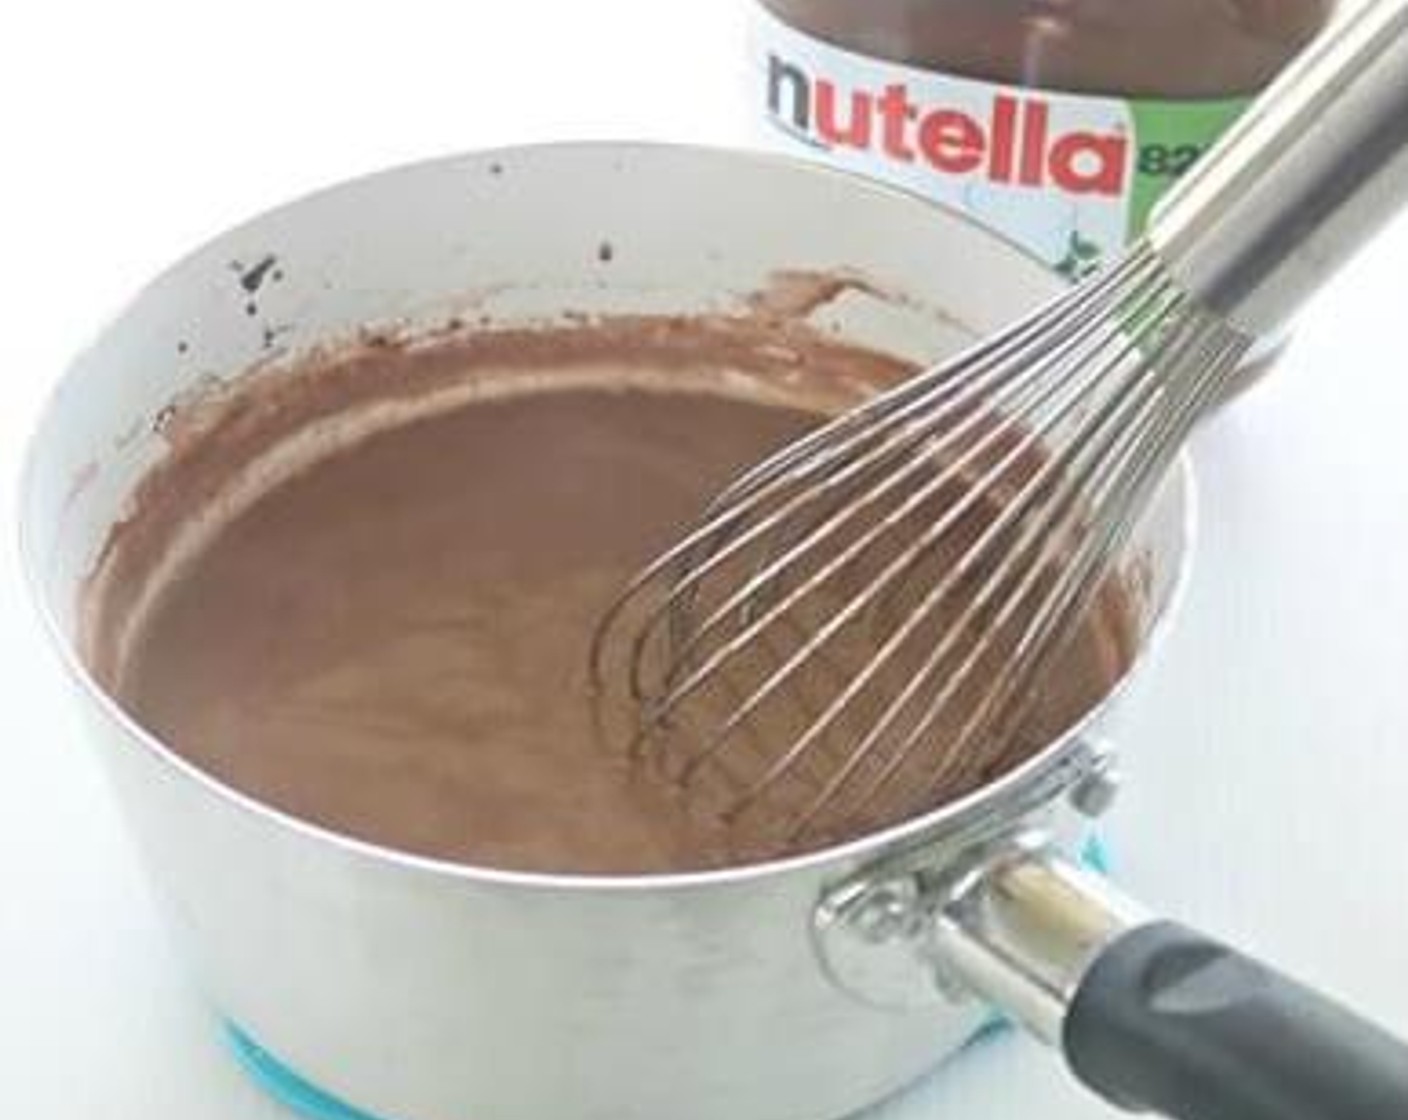 step 3 Soak the Gelatin Sheets (4) into cold water for a few seconds, squeeze out excess water and drop into milk mixture, stir till gelatin melted. Turn off heat and stir in Nutella® (2 Tbsp), stir well again till melted.